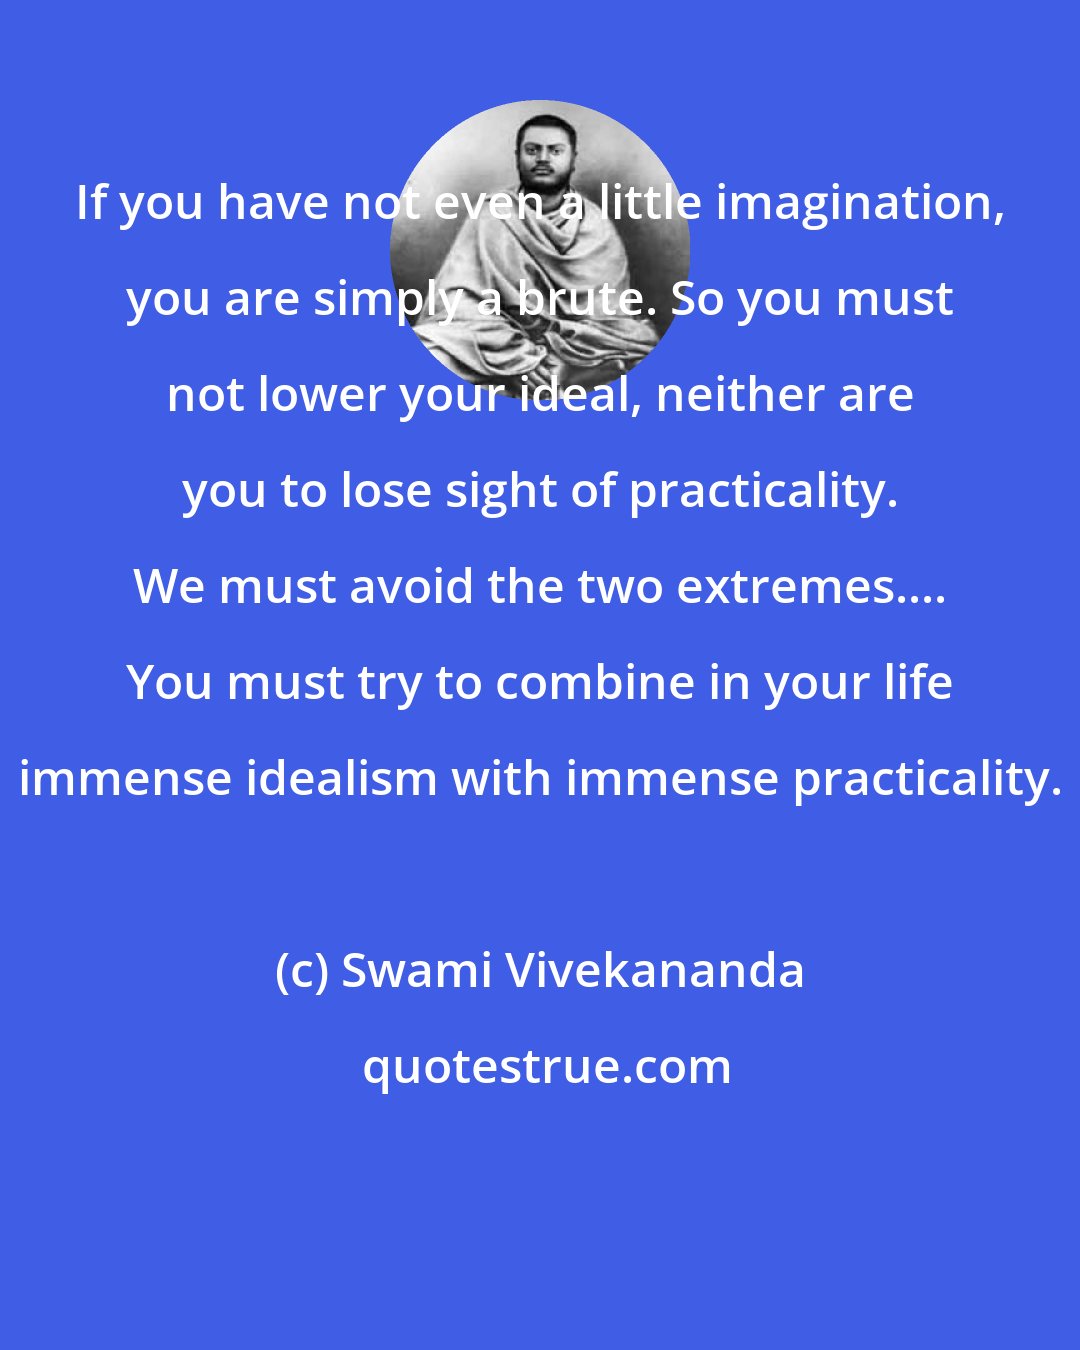 Swami Vivekananda: If you have not even a little imagination, you are simply a brute. So you must not lower your ideal, neither are you to lose sight of practicality. We must avoid the two extremes.... You must try to combine in your life immense idealism with immense practicality.